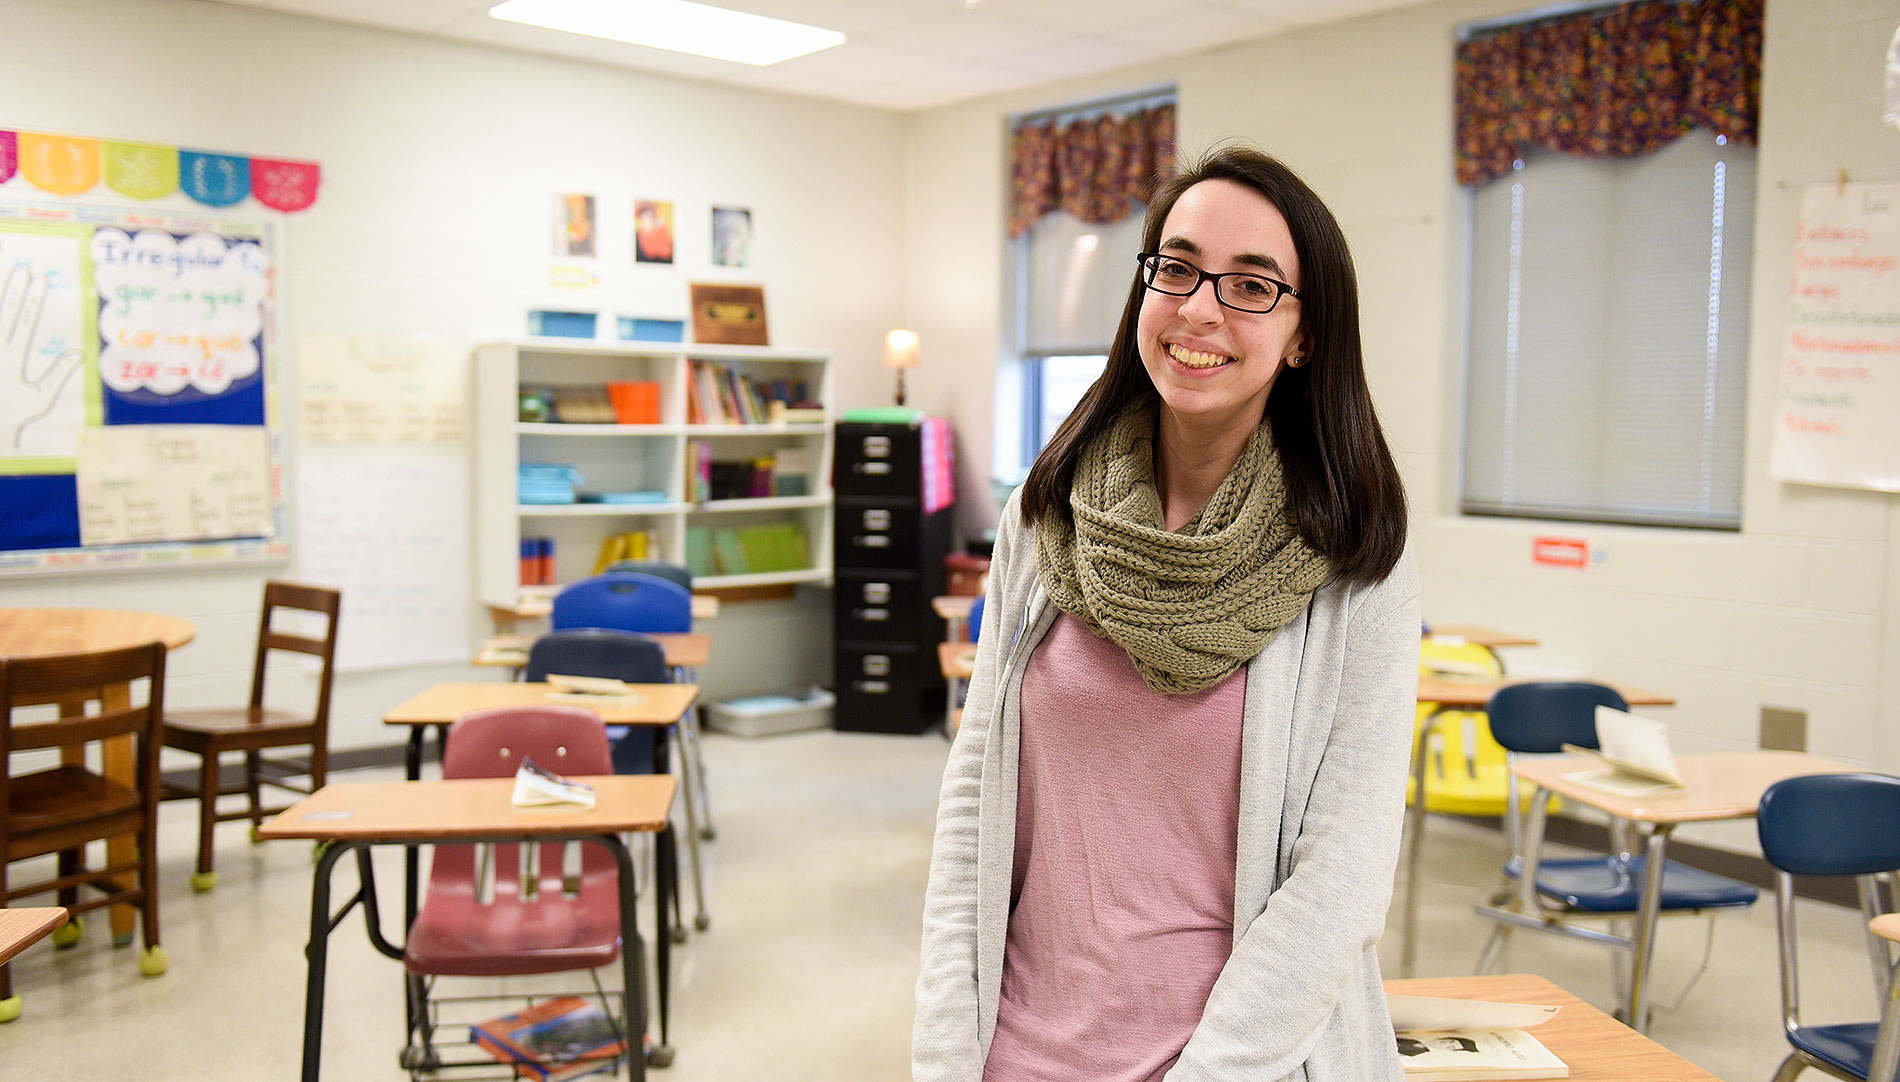 Victoria Millard ’20 landed a role as the student director of Berry’s English as a Second Language Program, strengthening her classroom skills while researching how students learn languages.